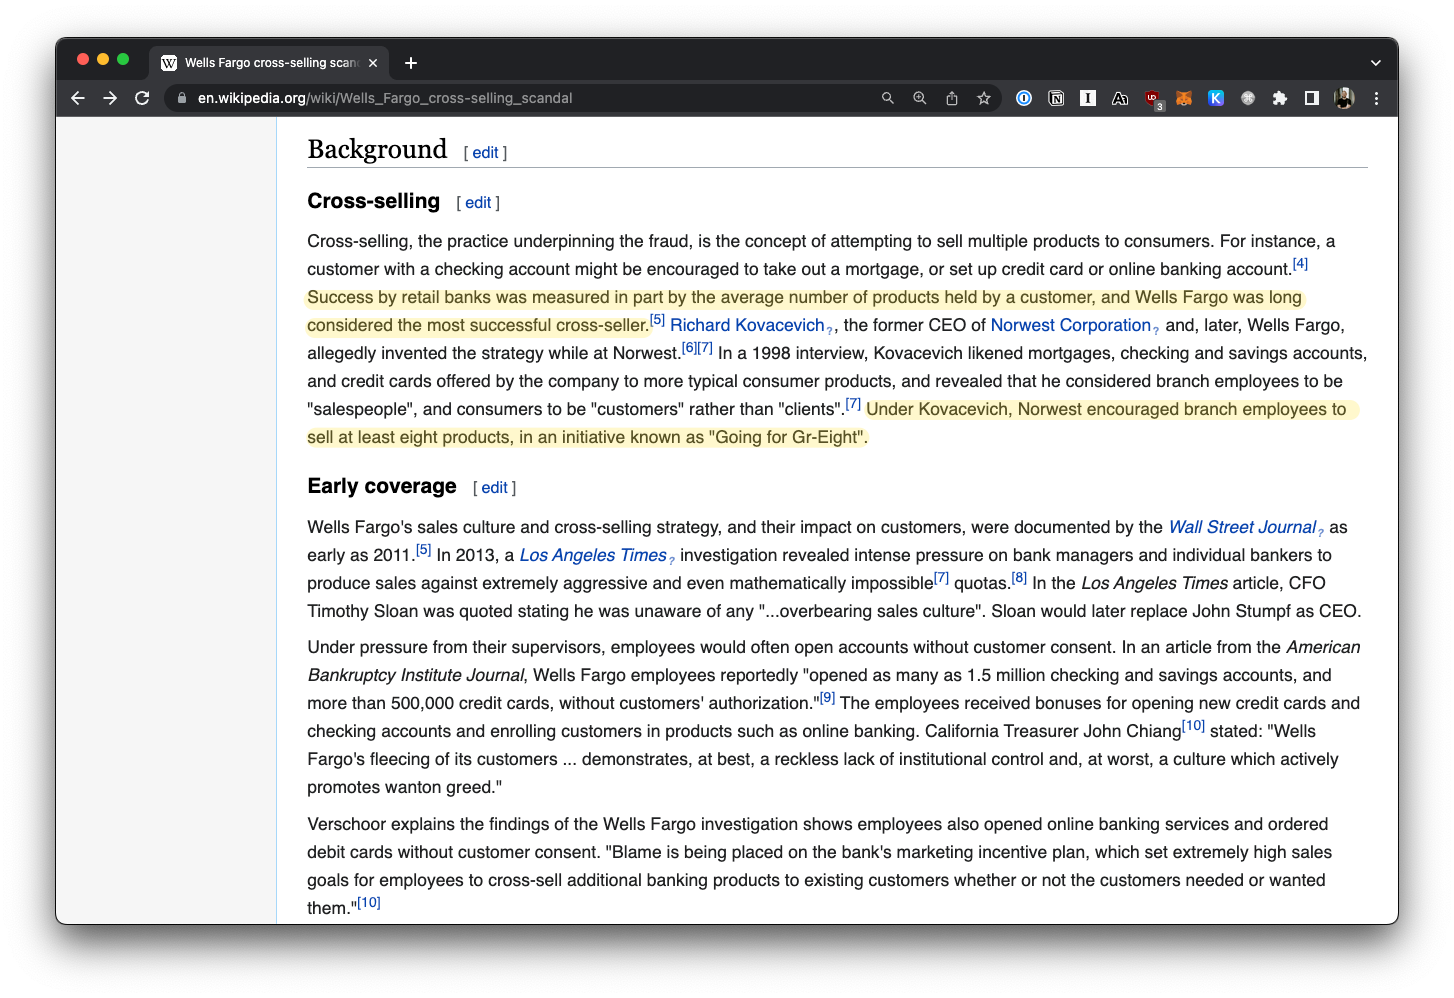 Screenshot of the Wikipedia article covering the Well's Fargo cross-selling scandal, with some passages highlighted.